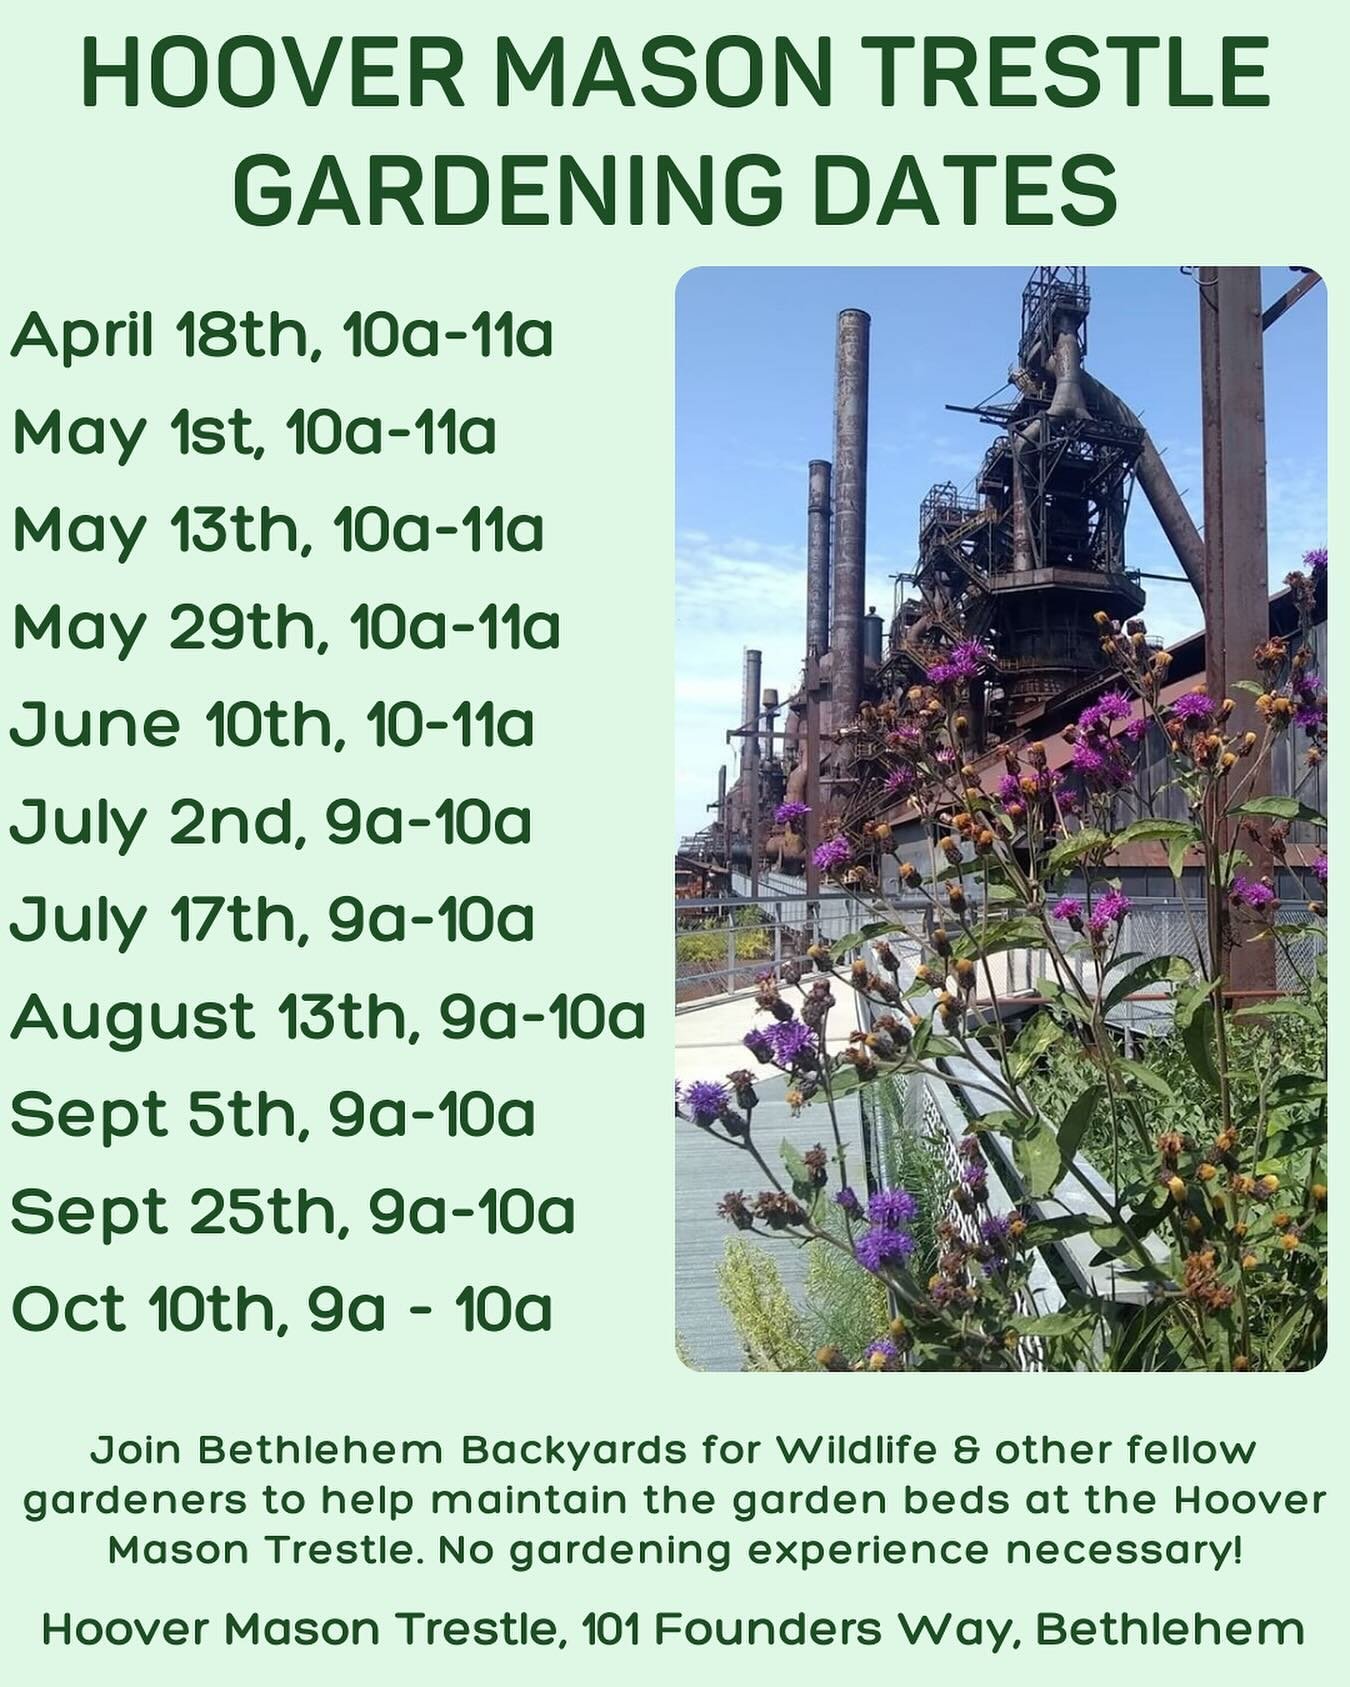 Join Bethlehem Backyards for Wildlife and other fellow gardeners to help maintain the garden beds at the Hoover Mason Trestle. No gardening experience necessary! Bring some gardening gloves and a favorite gardening tool. Meet us at the top of the big